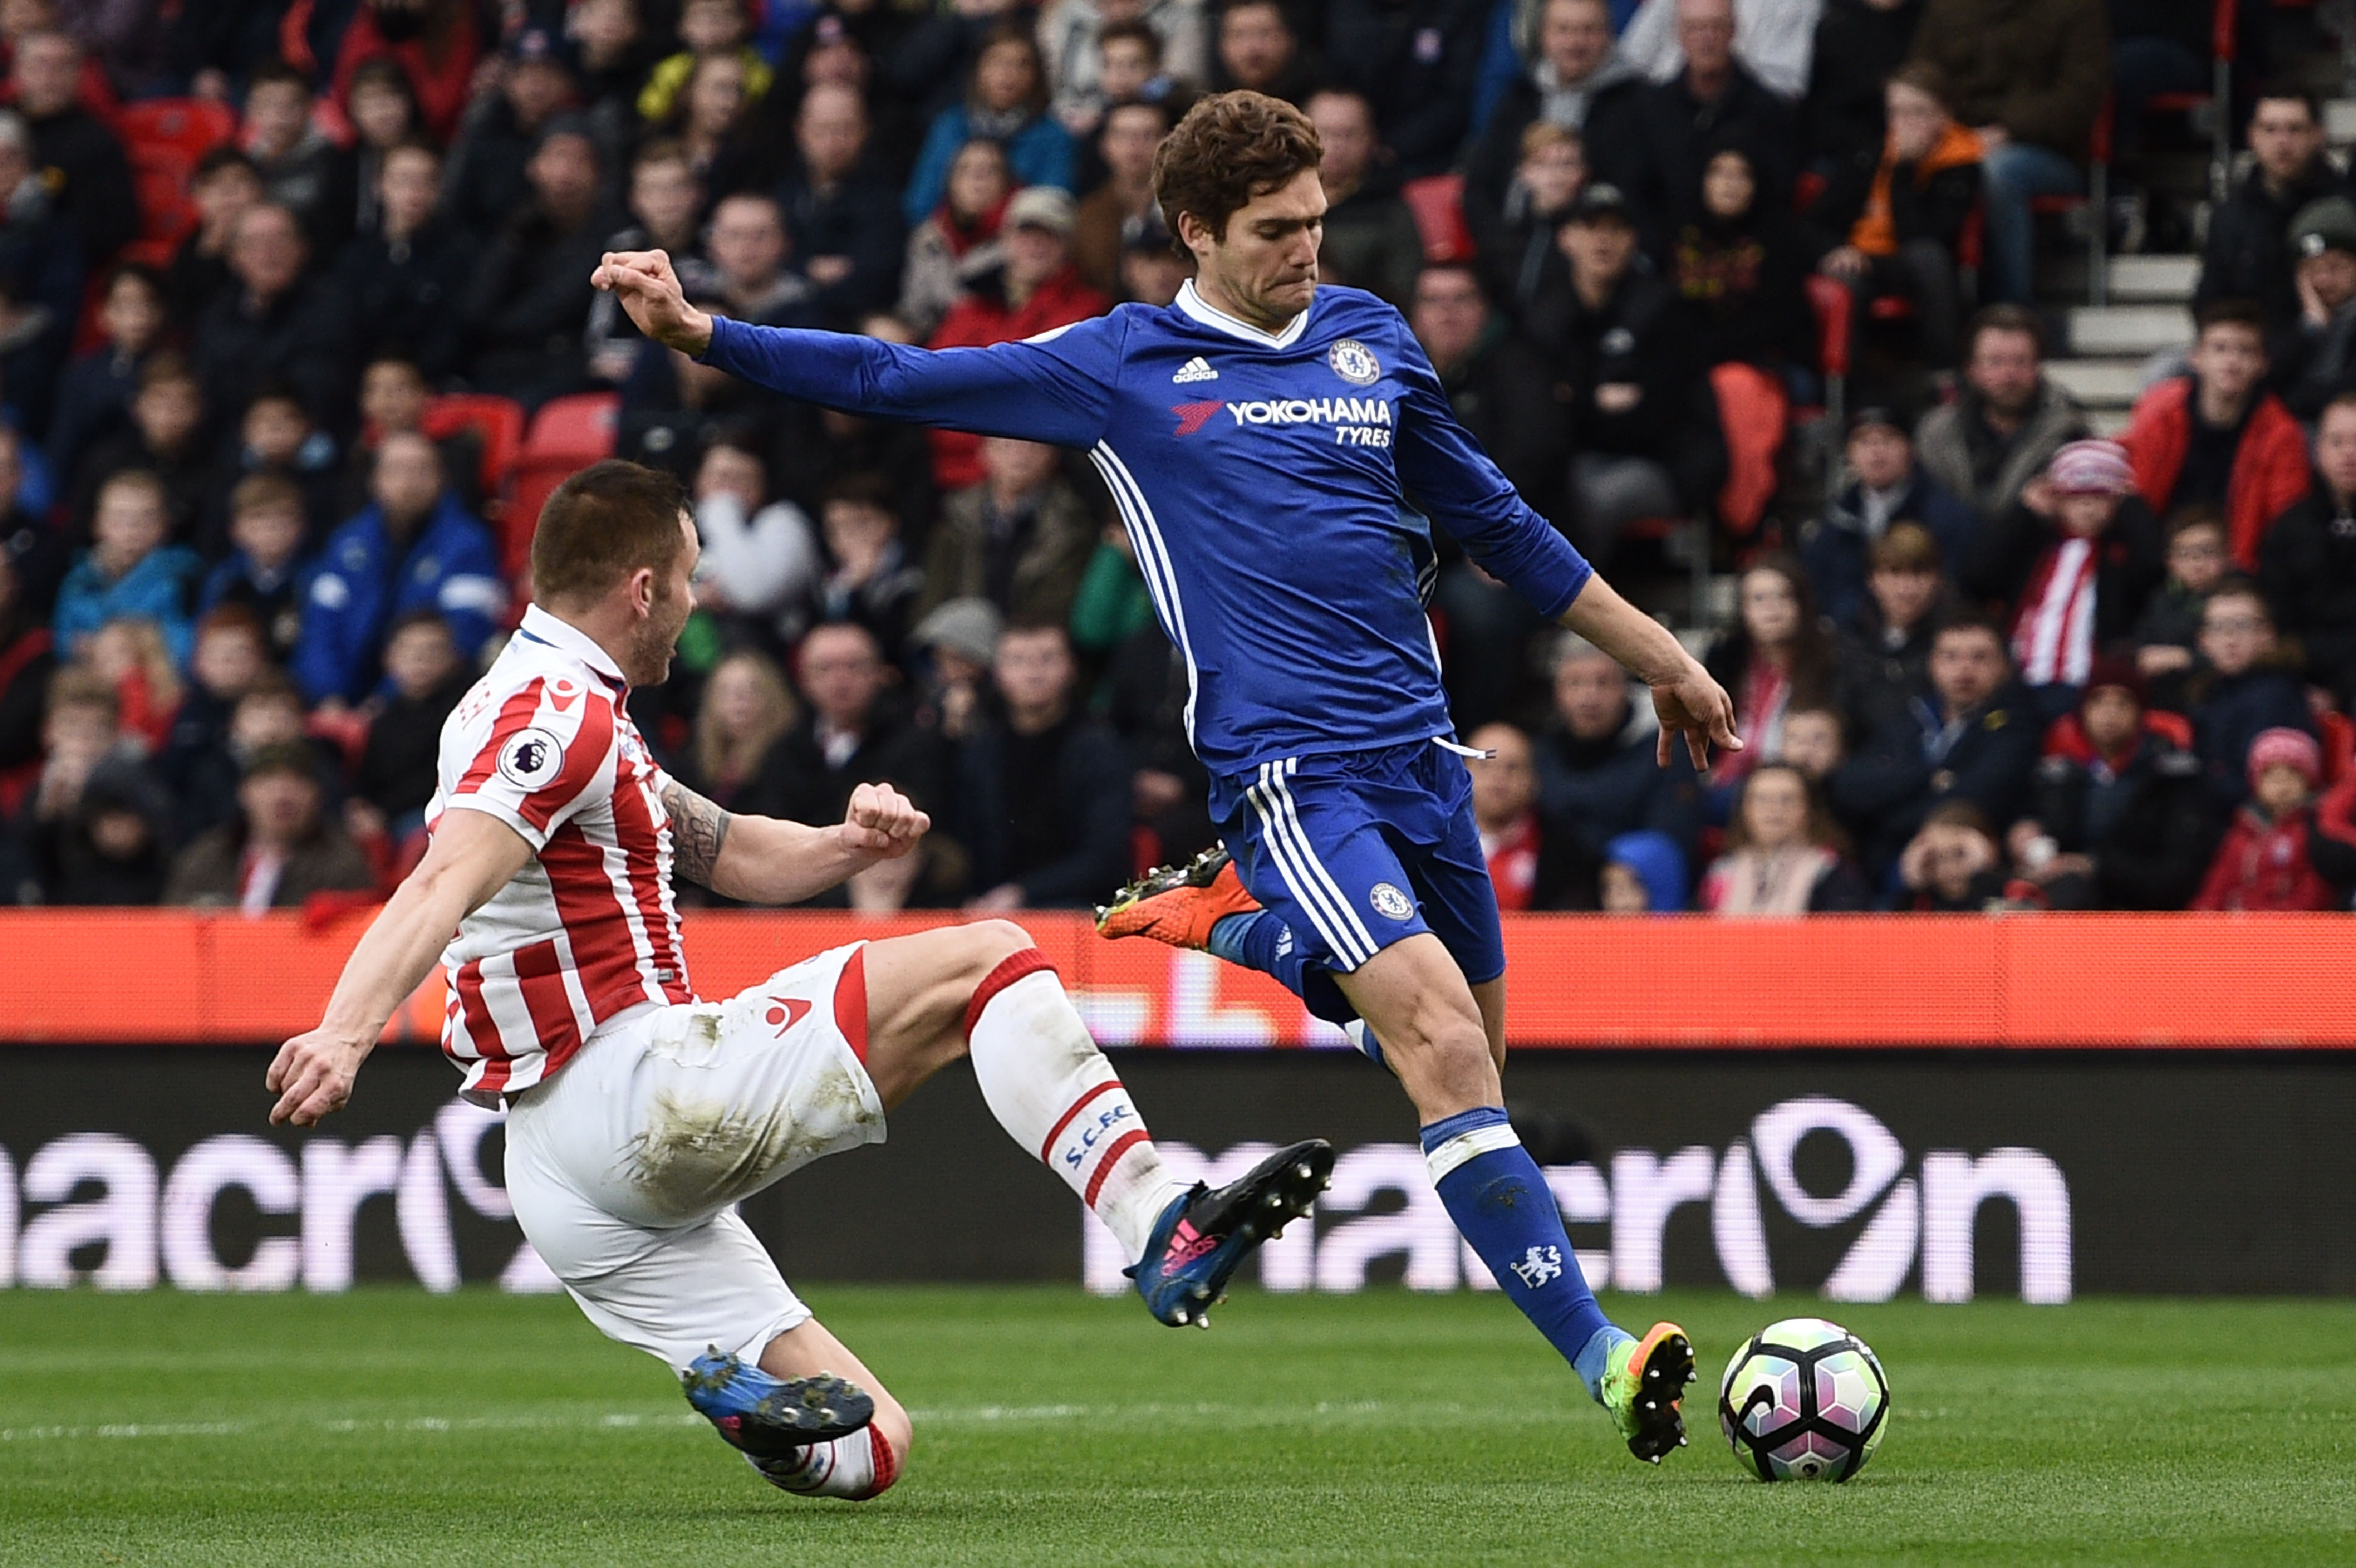 Stoke City's English-born Scottish defender Phil Bardsley (L) tries to block a shot by Chelsea's Spanish defender Marcos Alonso during the English Premier League football match between Stoke City and Chelsea at the Bet365 Stadium in Stoke-on-Trent, central England on March 18, 2017. / AFP PHOTO / Oli SCARFF / RESTRICTED TO EDITORIAL USE. No use with unauthorized audio, video, data, fixture lists, club/league logos or 'live' services. Online in-match use limited to 75 images, no video emulation. No use in betting, games or single club/league/player publications.  /         (Photo credit should read OLI SCARFF/AFP/Getty Images)